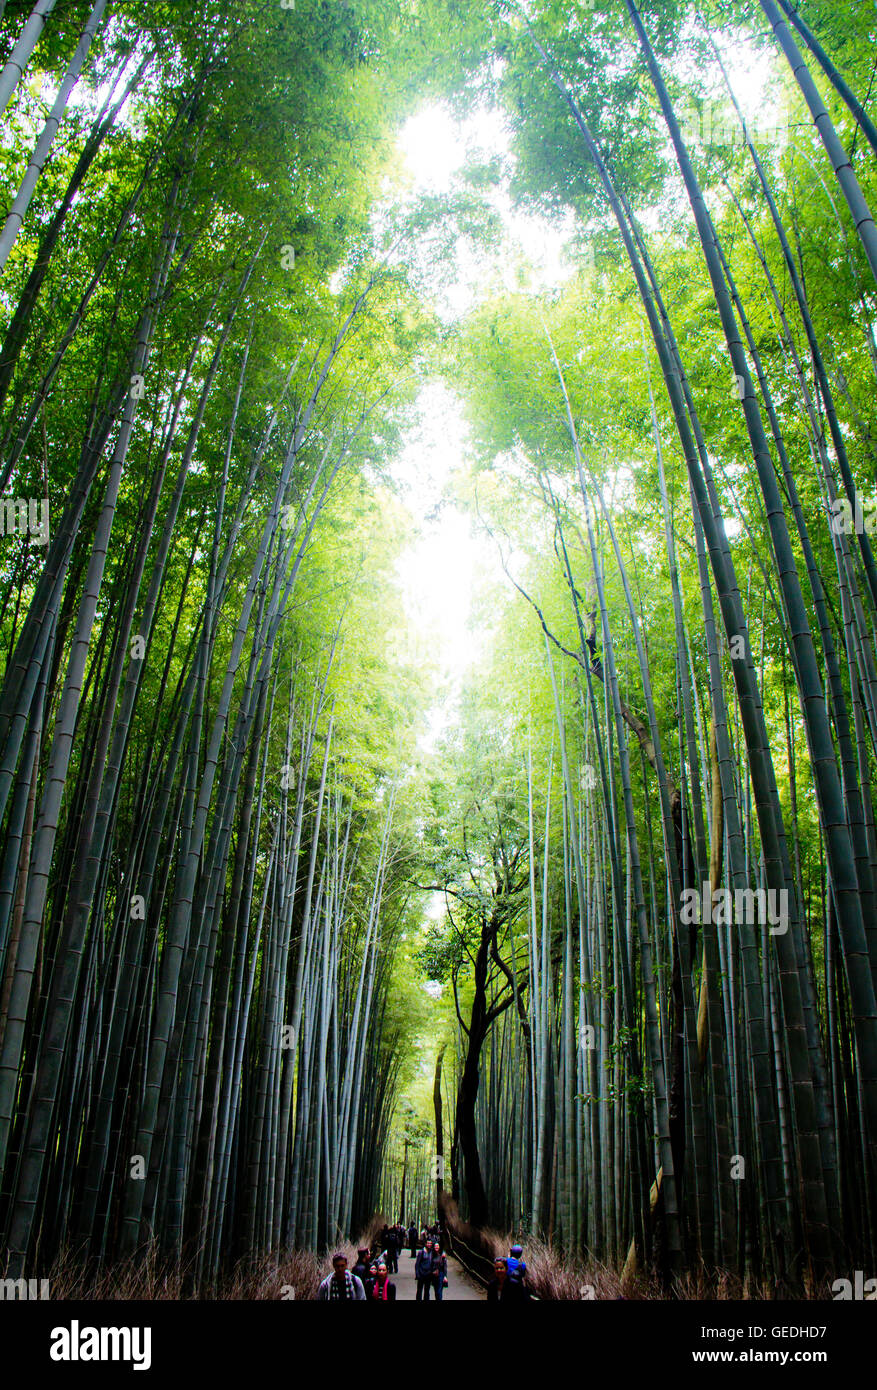 Bamboo forest in Kyoto Japan Stock Photo